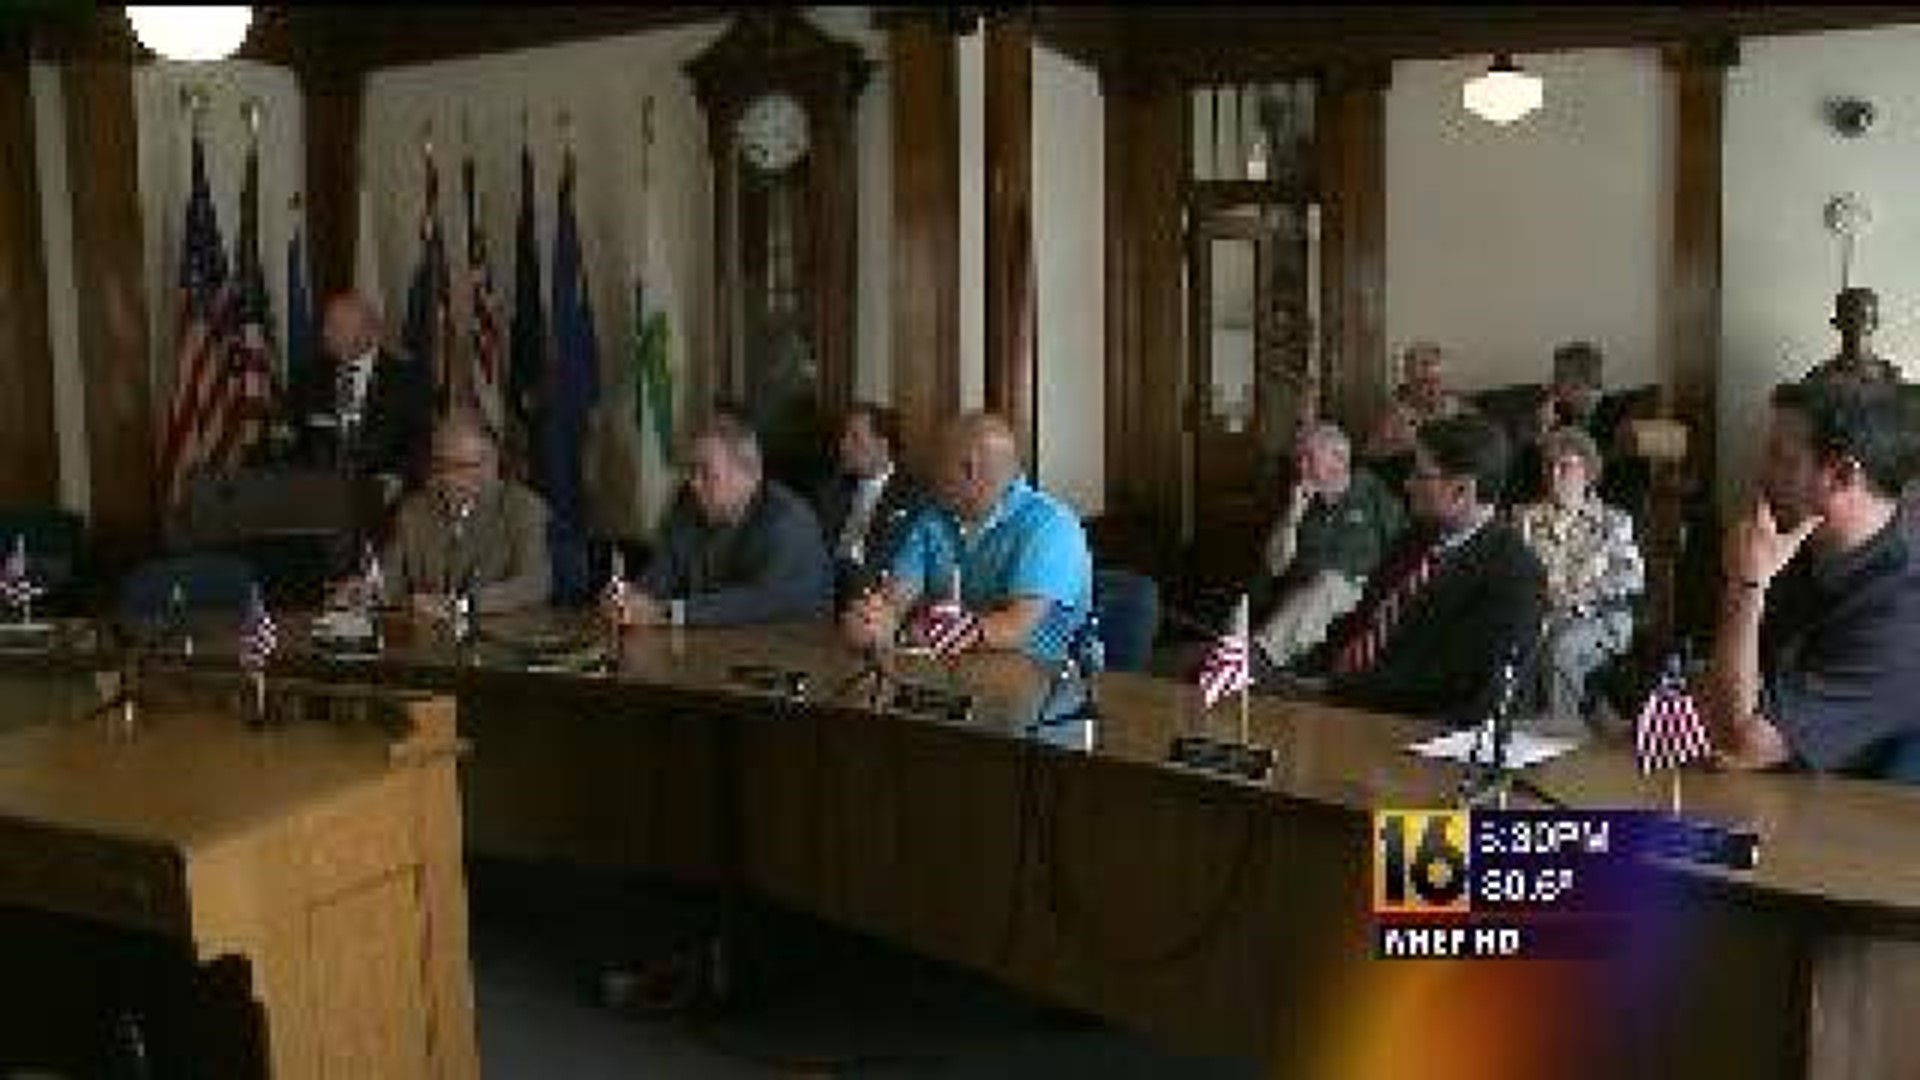 New Ordinance to Fight Crime in Wilkes-Barre